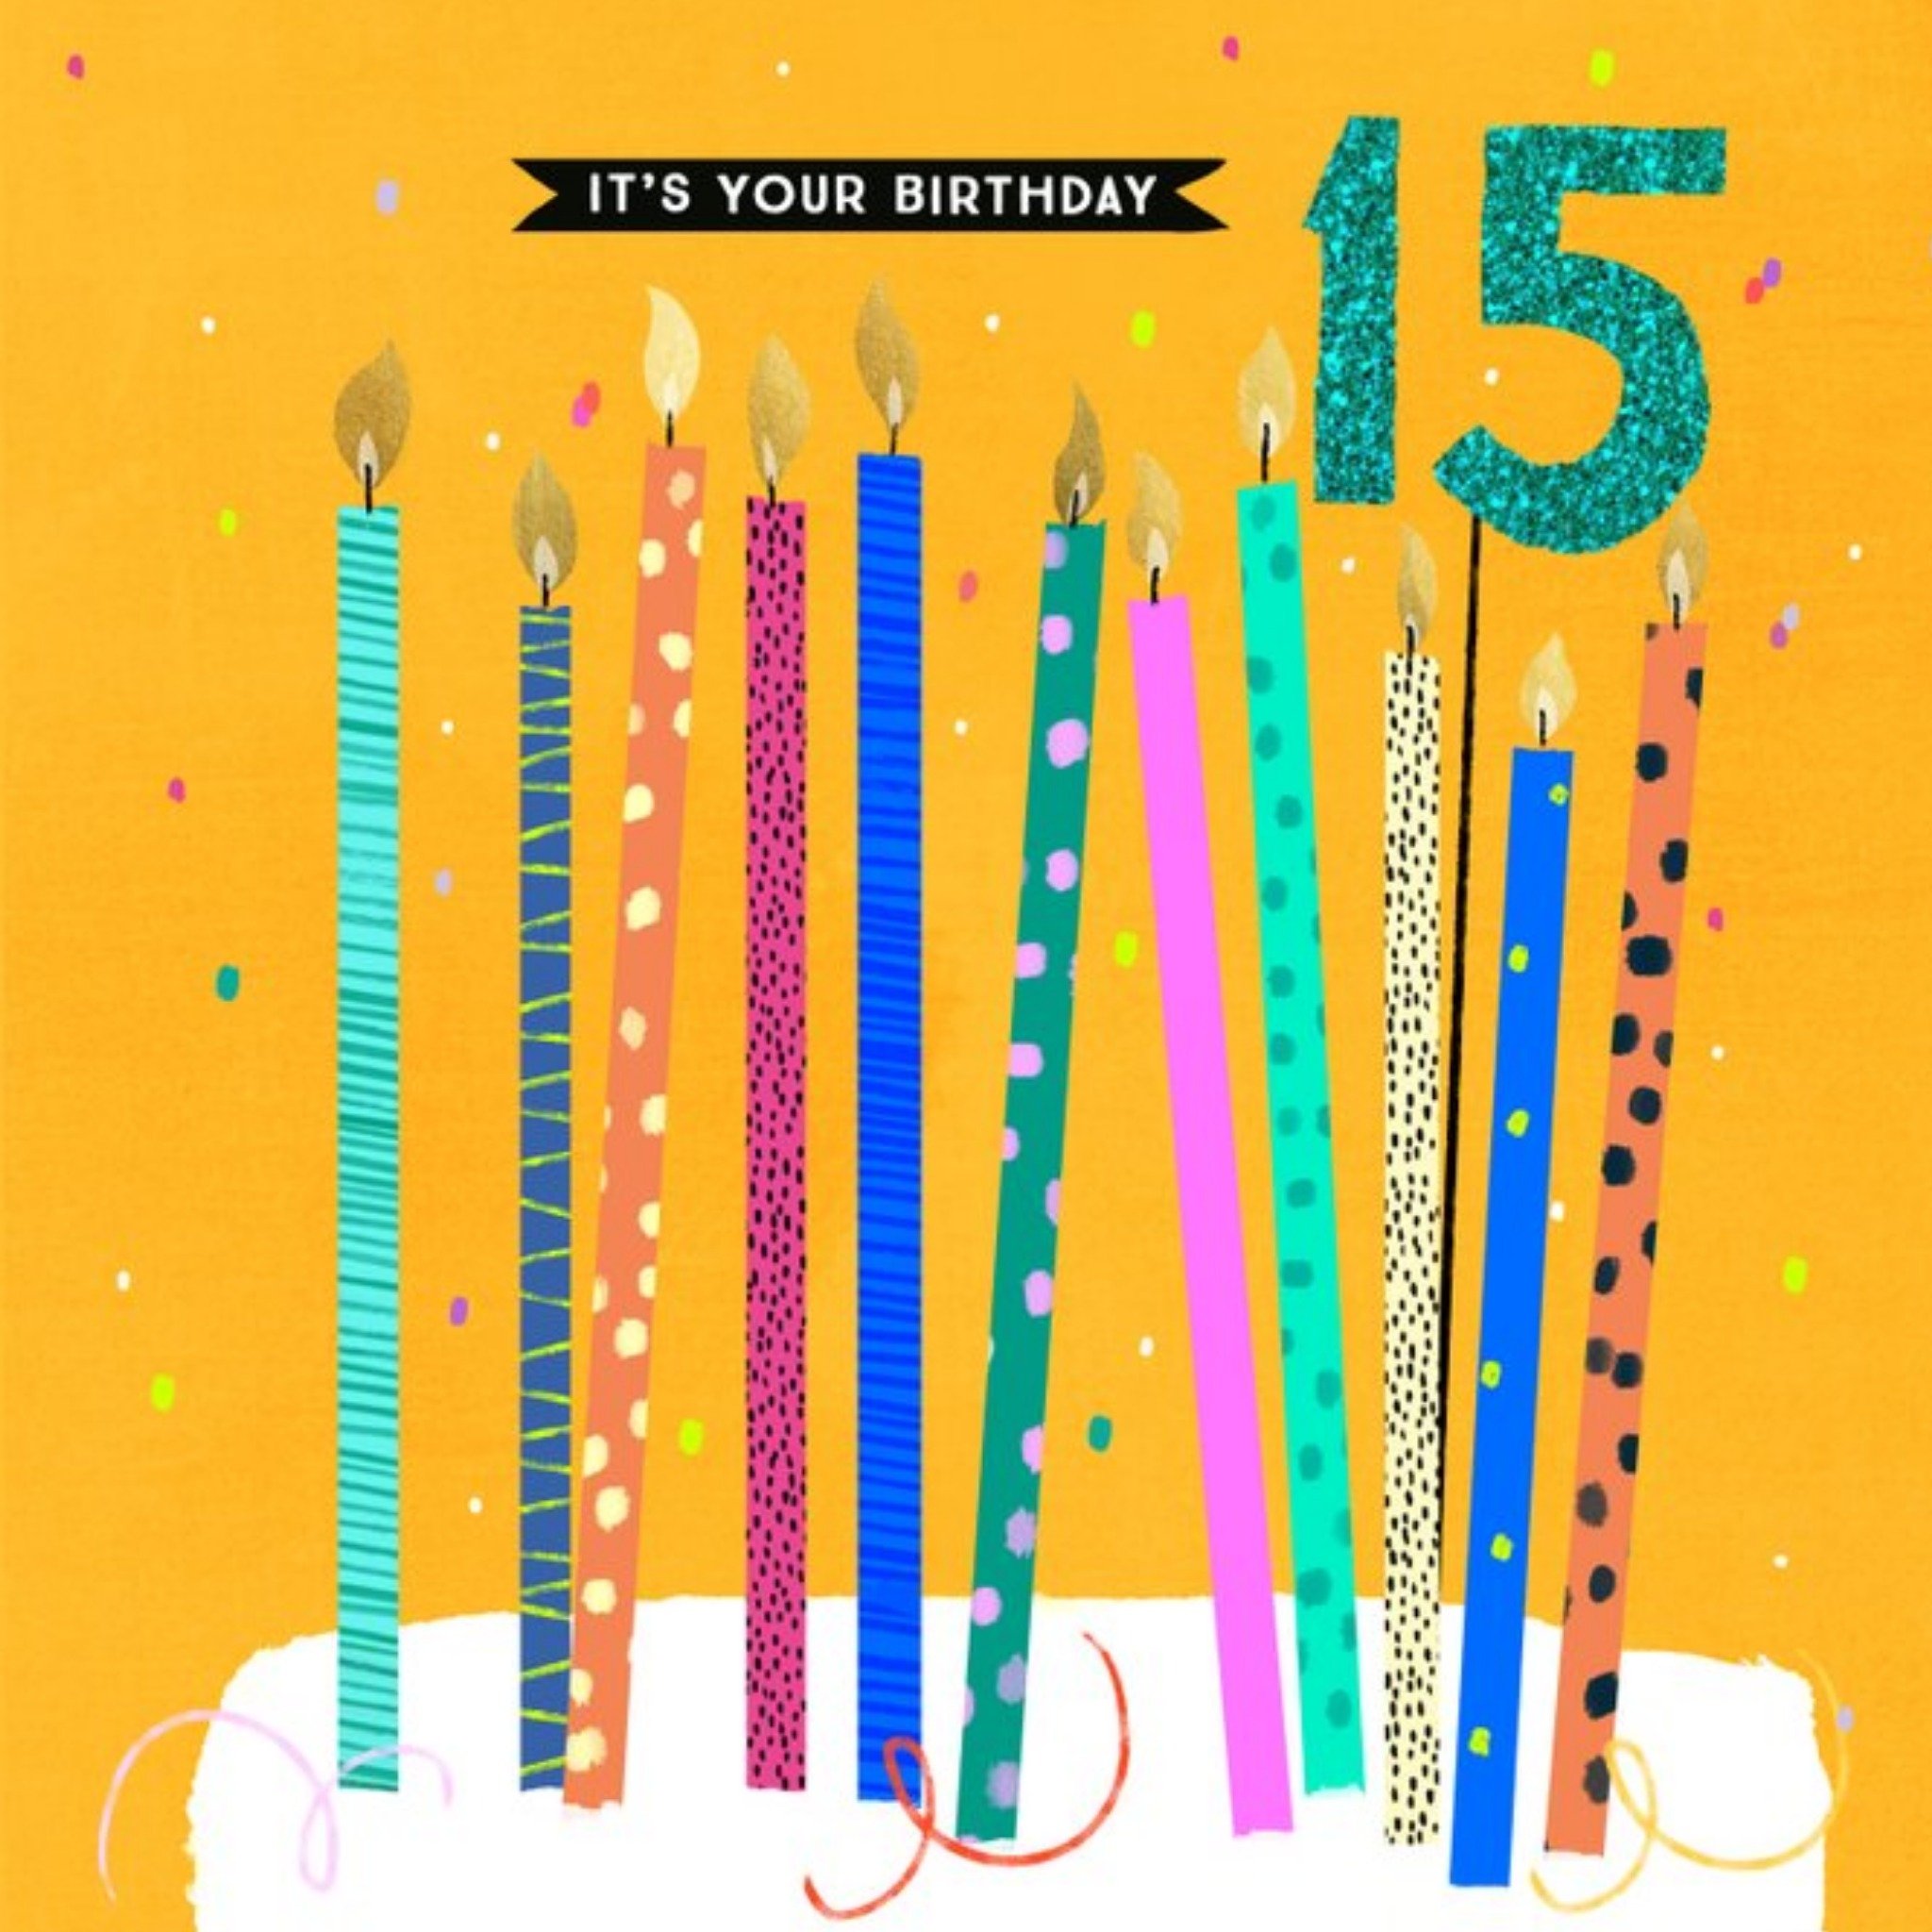 Moonpig Modern Design Candles Cake 15 Its Your Birthday Card, Square